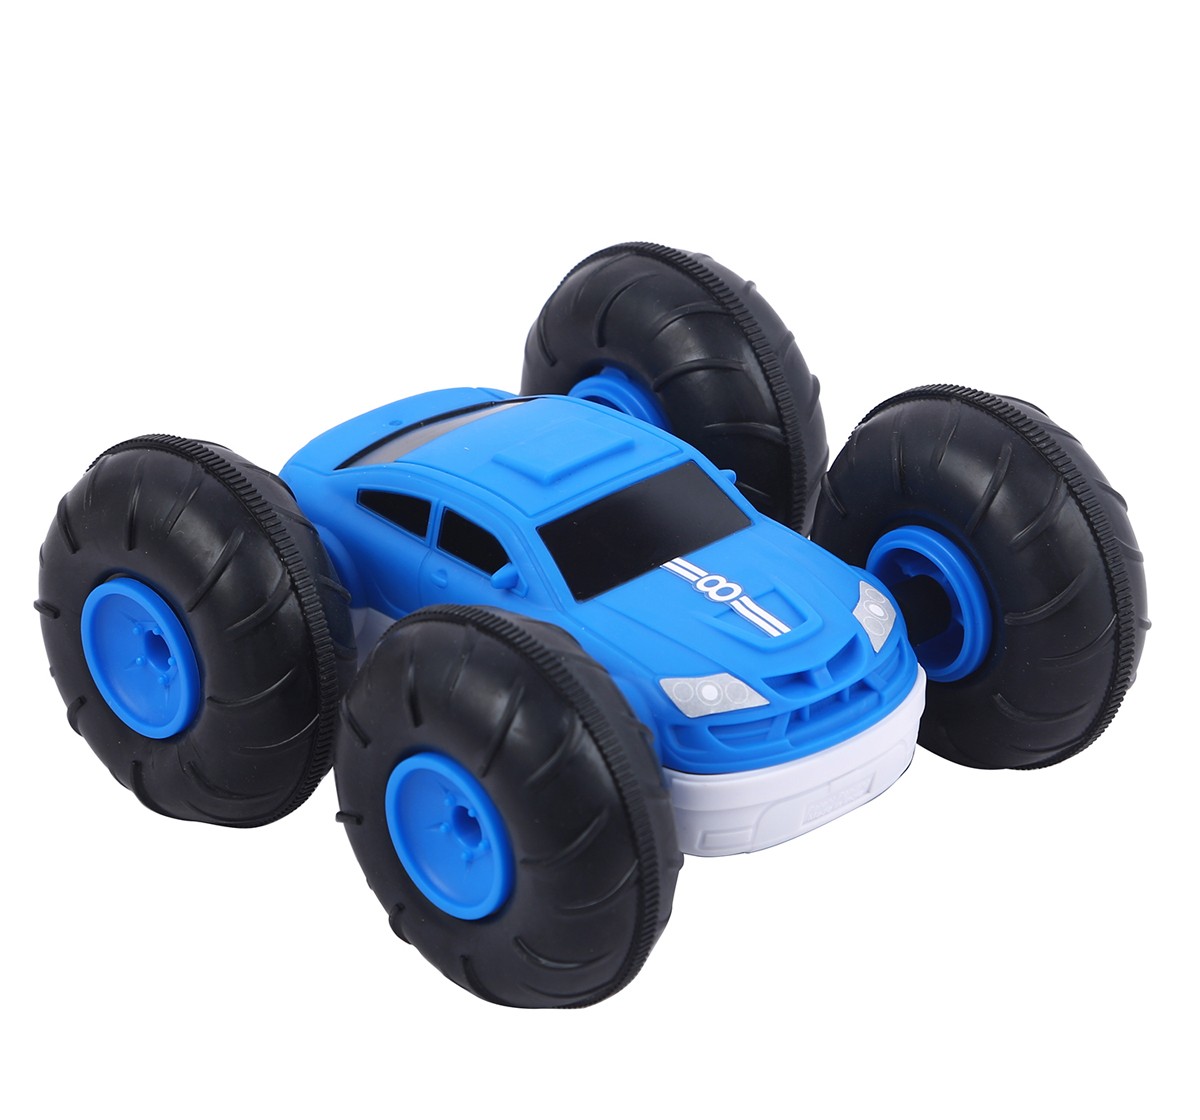 Flip Stunt Rally Car Remote Controlled Car by Sharper Image, For Kids 6 Years and Above, Blue